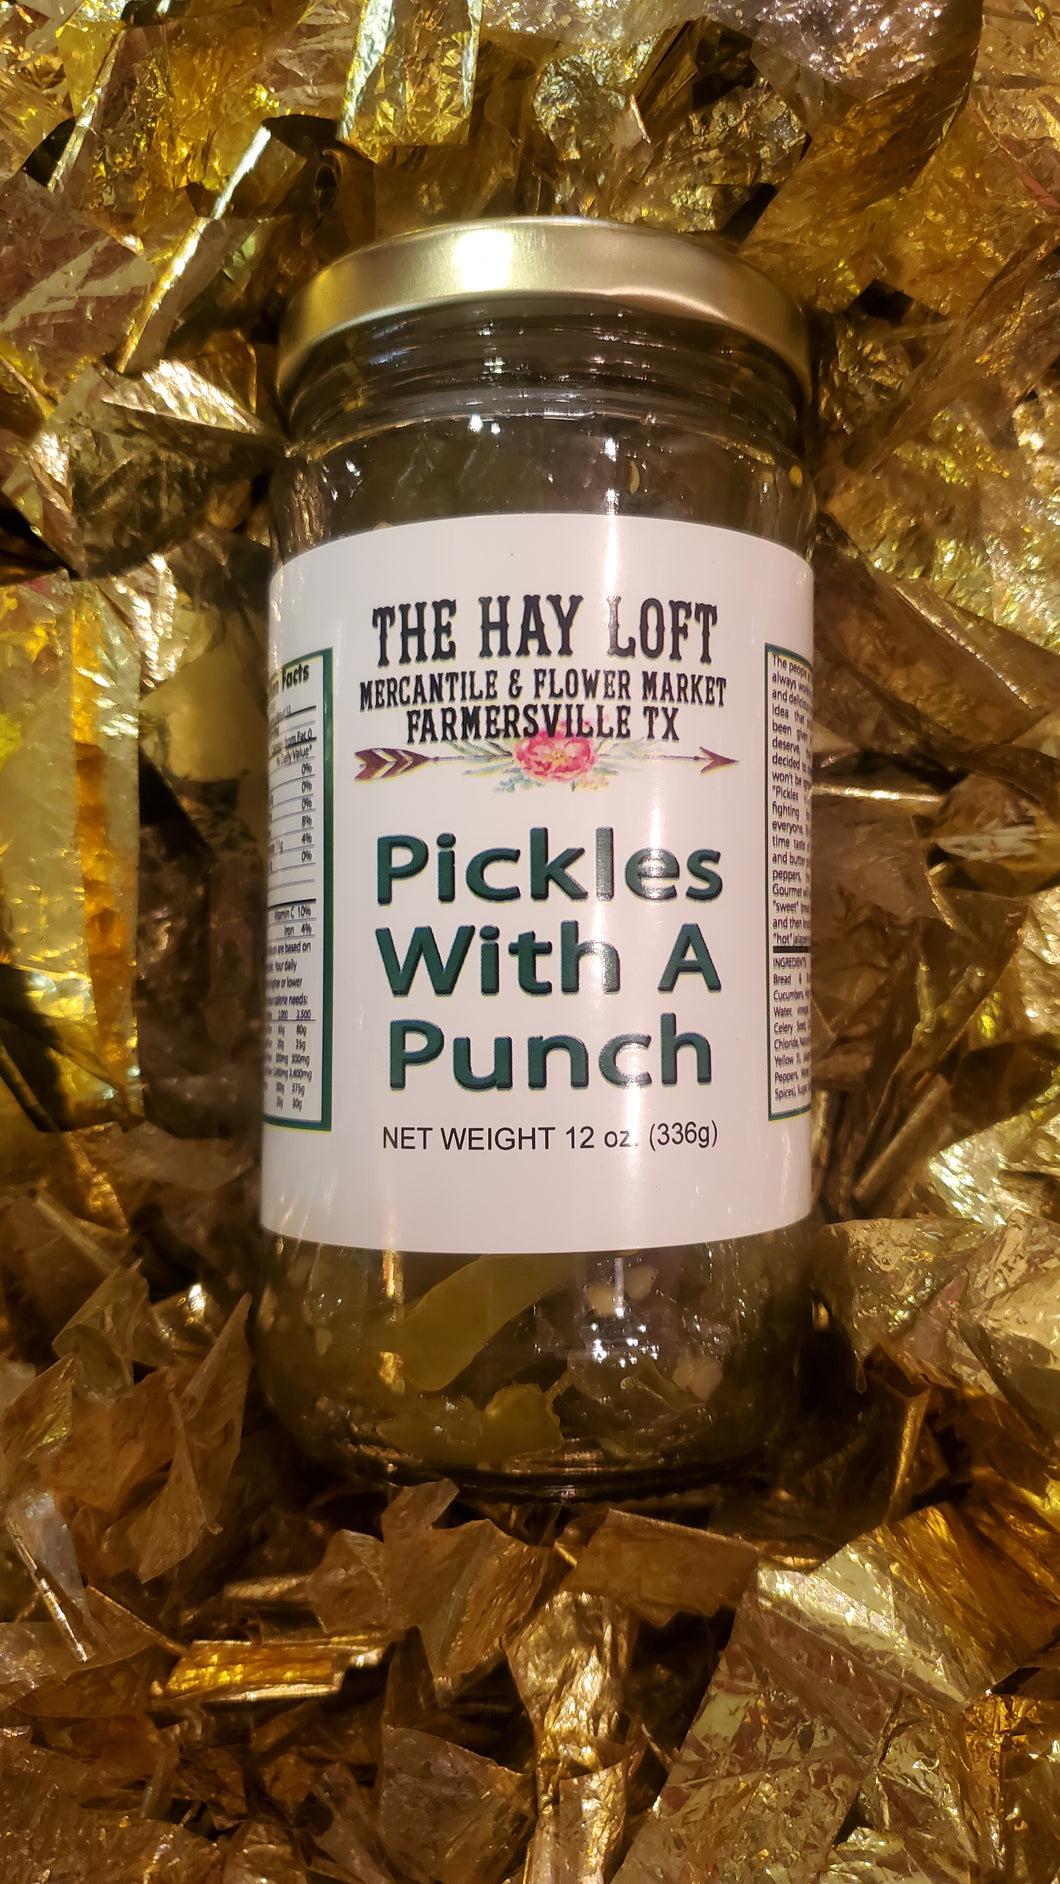 Pickles with a Punch